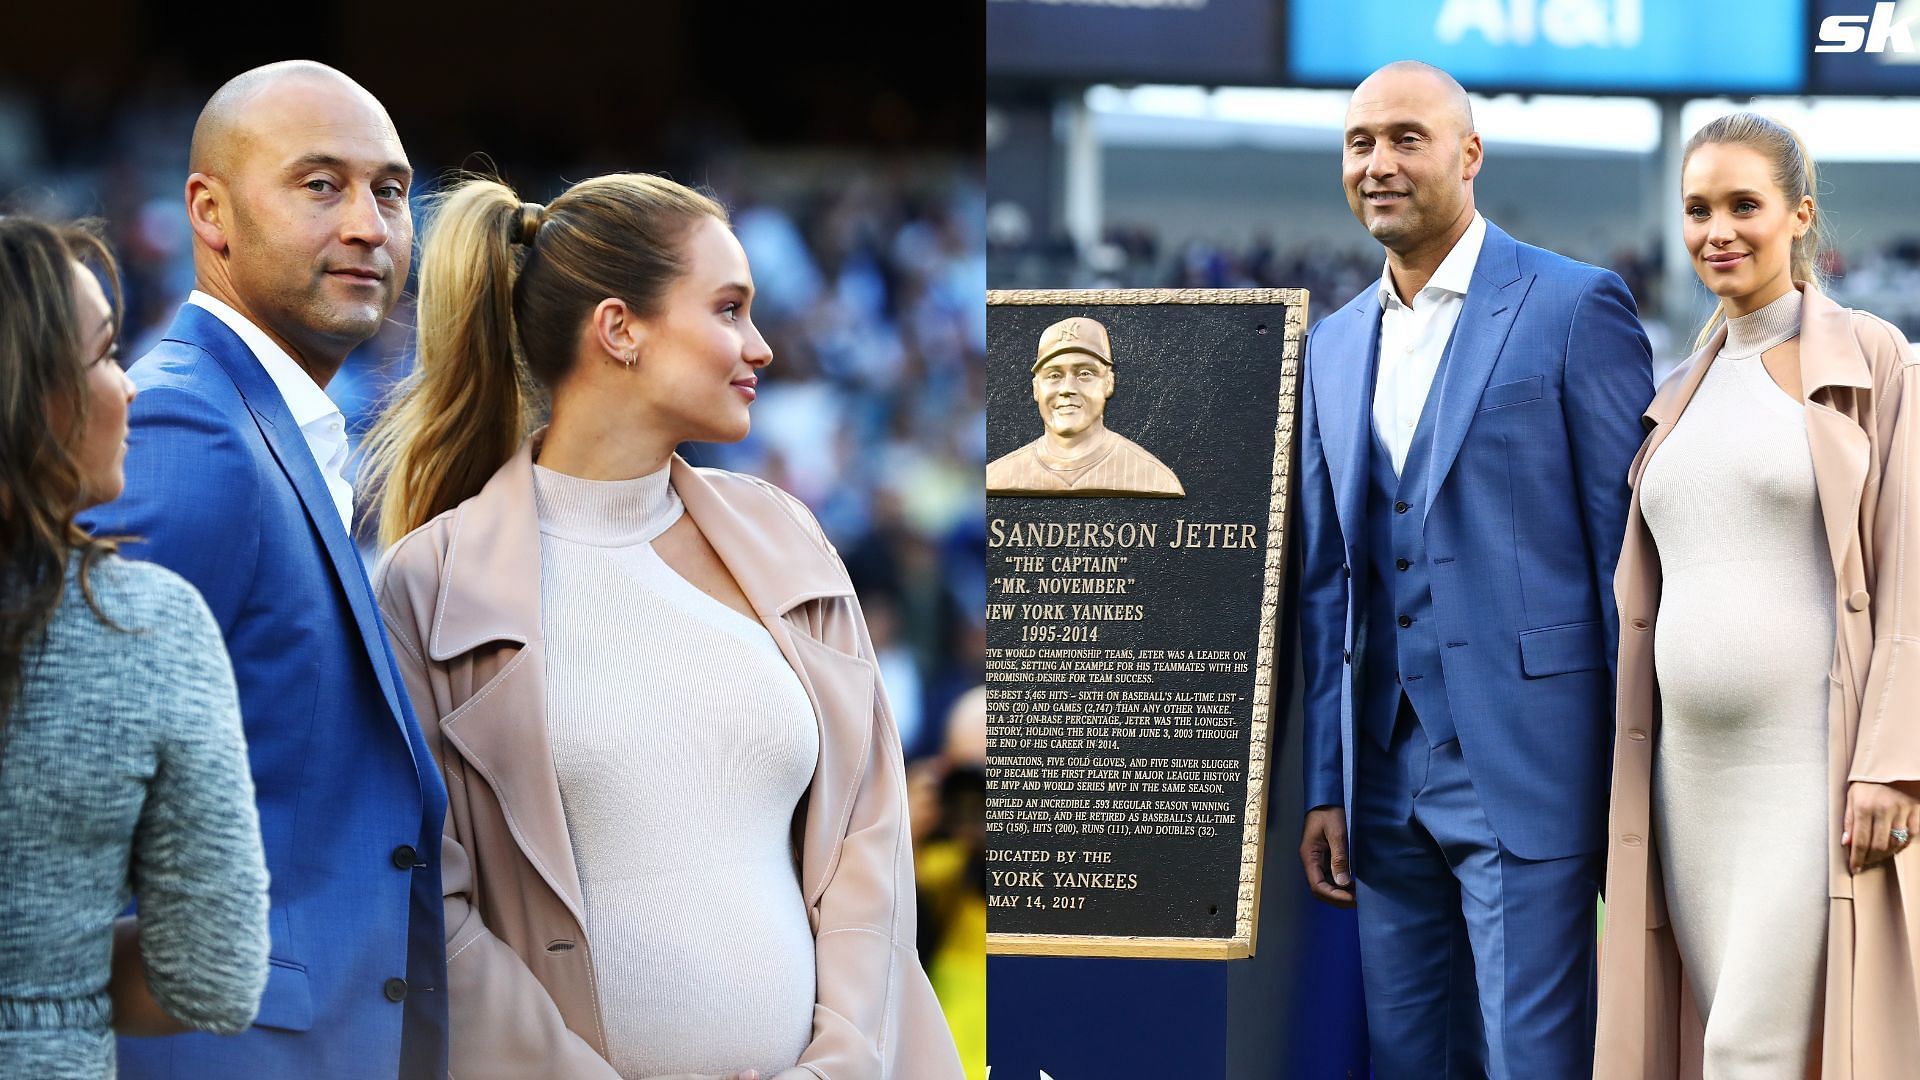 Derek Jeter poses with his wife Hannah Davis during the retirement ceremony of his number 2 jersey at Yankee Stadium in 2017